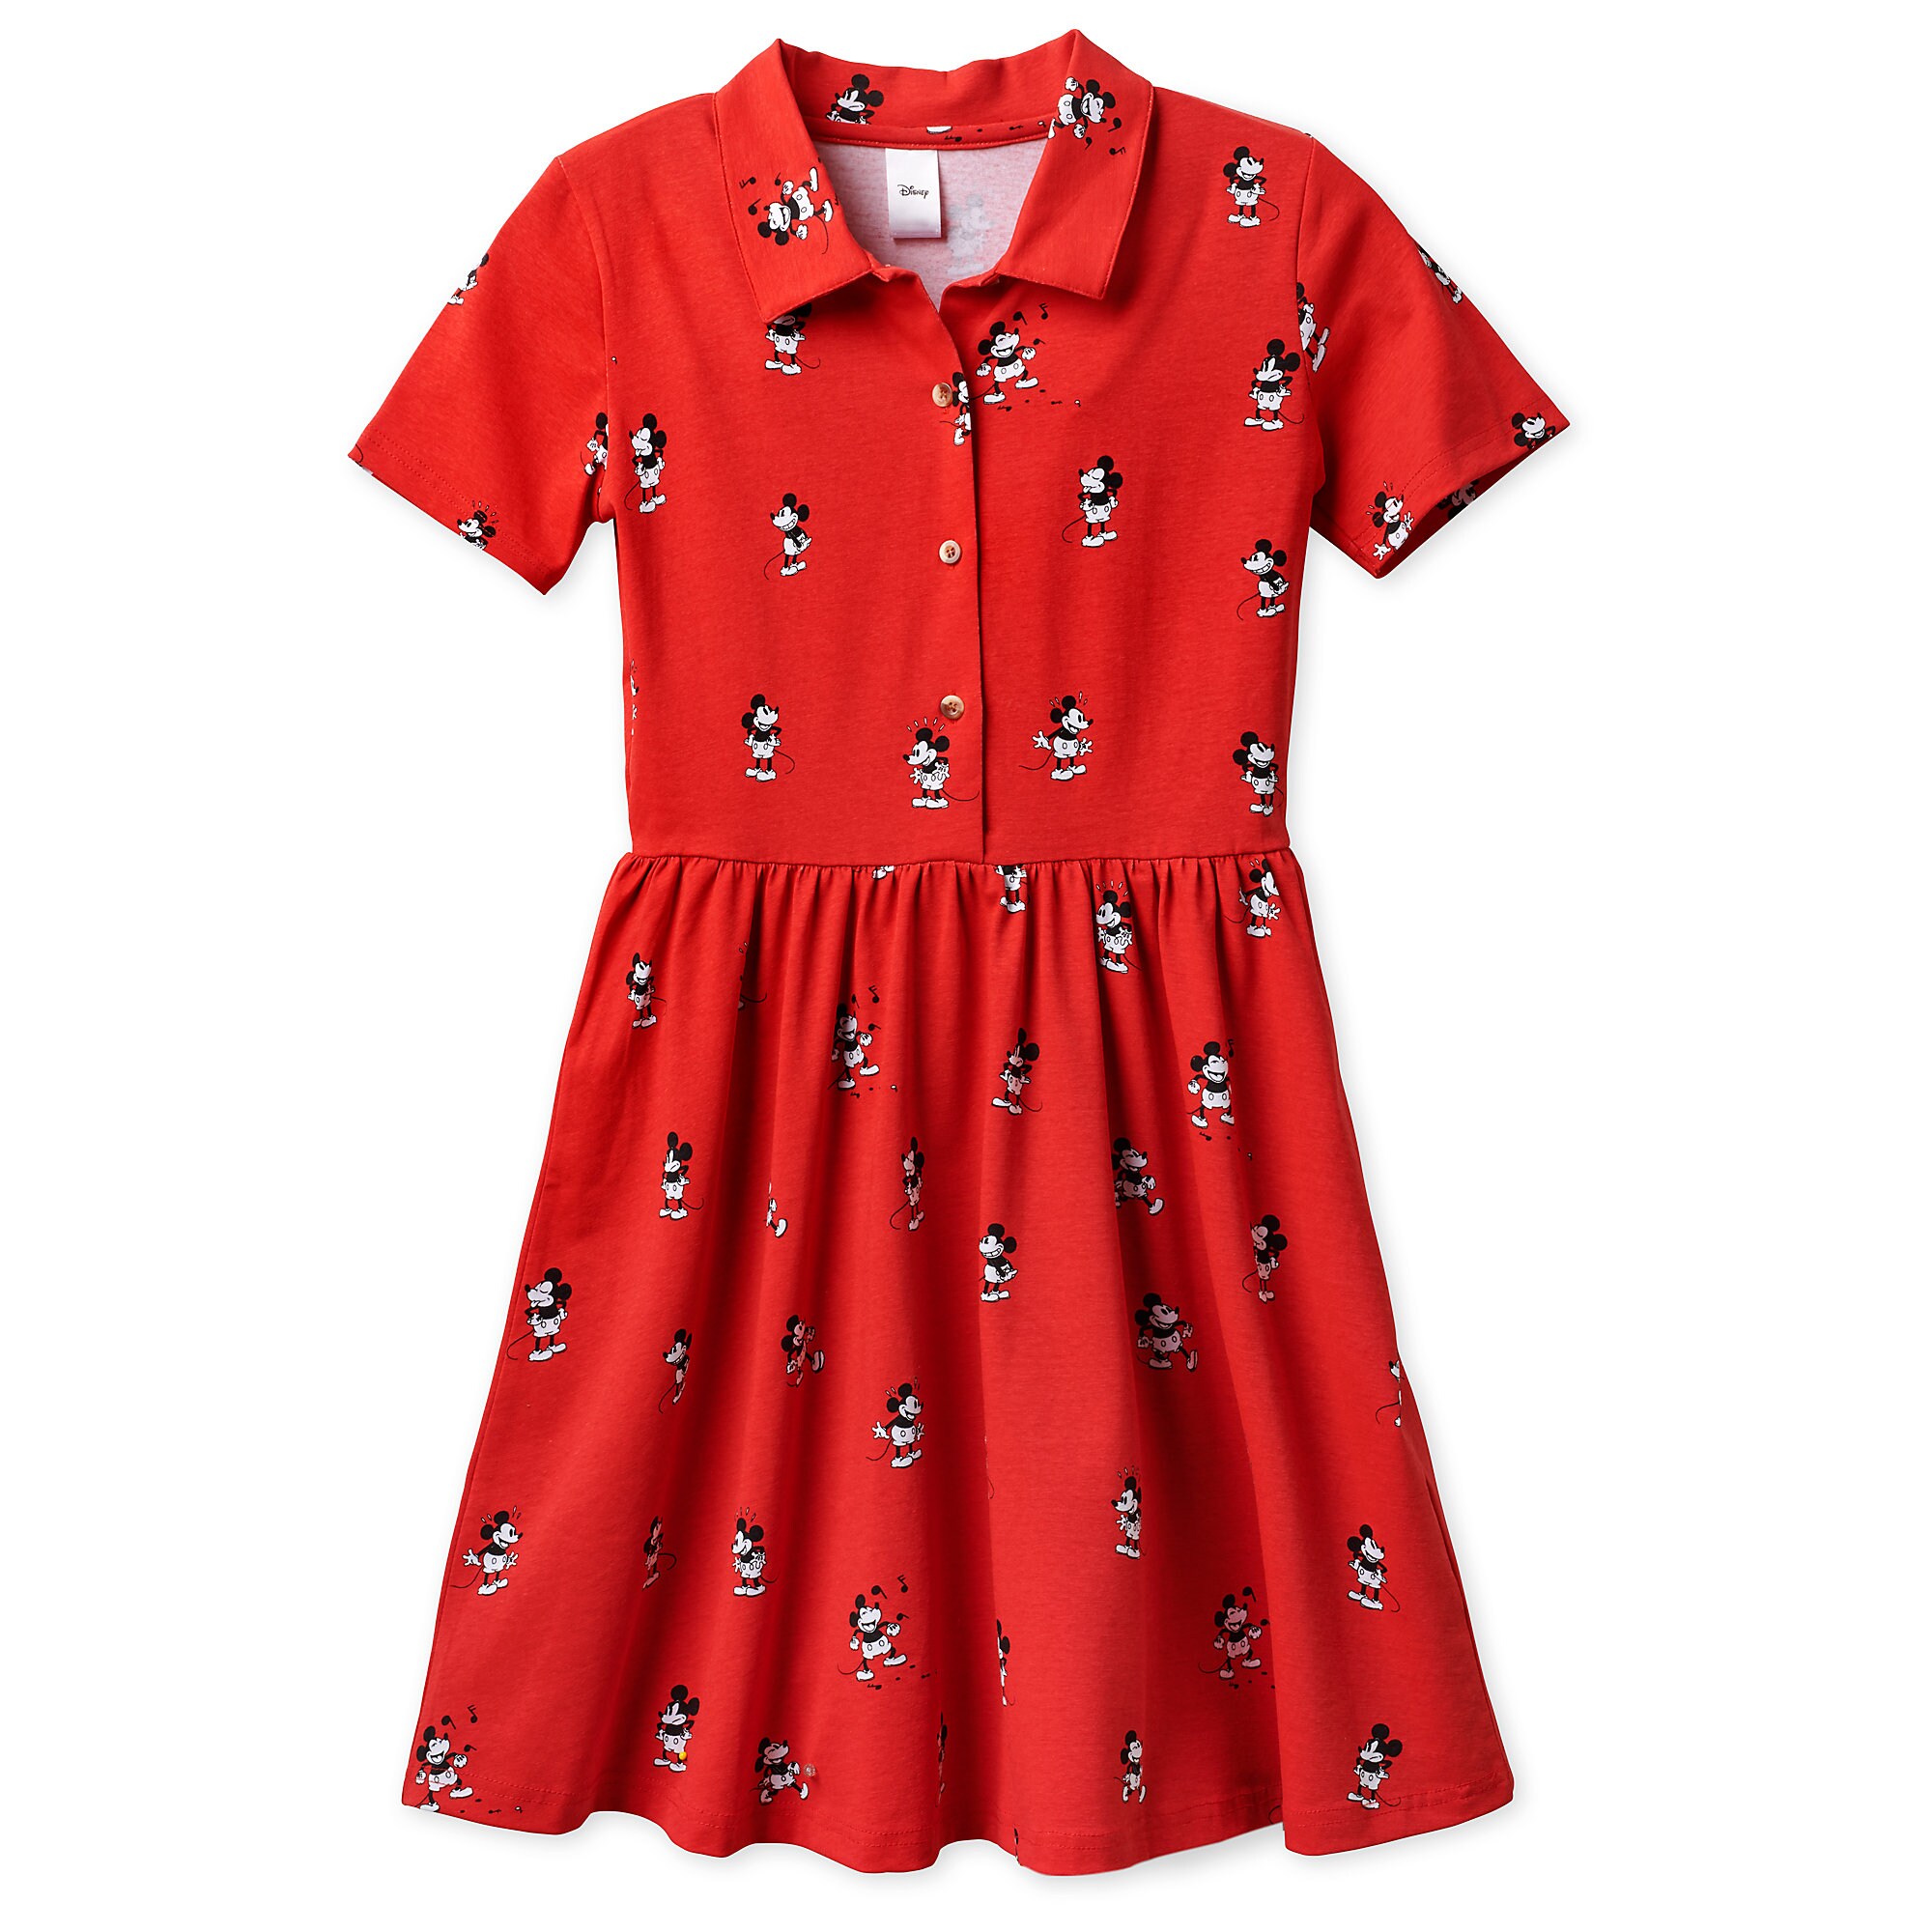 Vintage Mickey Mouse Button Up Dress by Cakeworthy